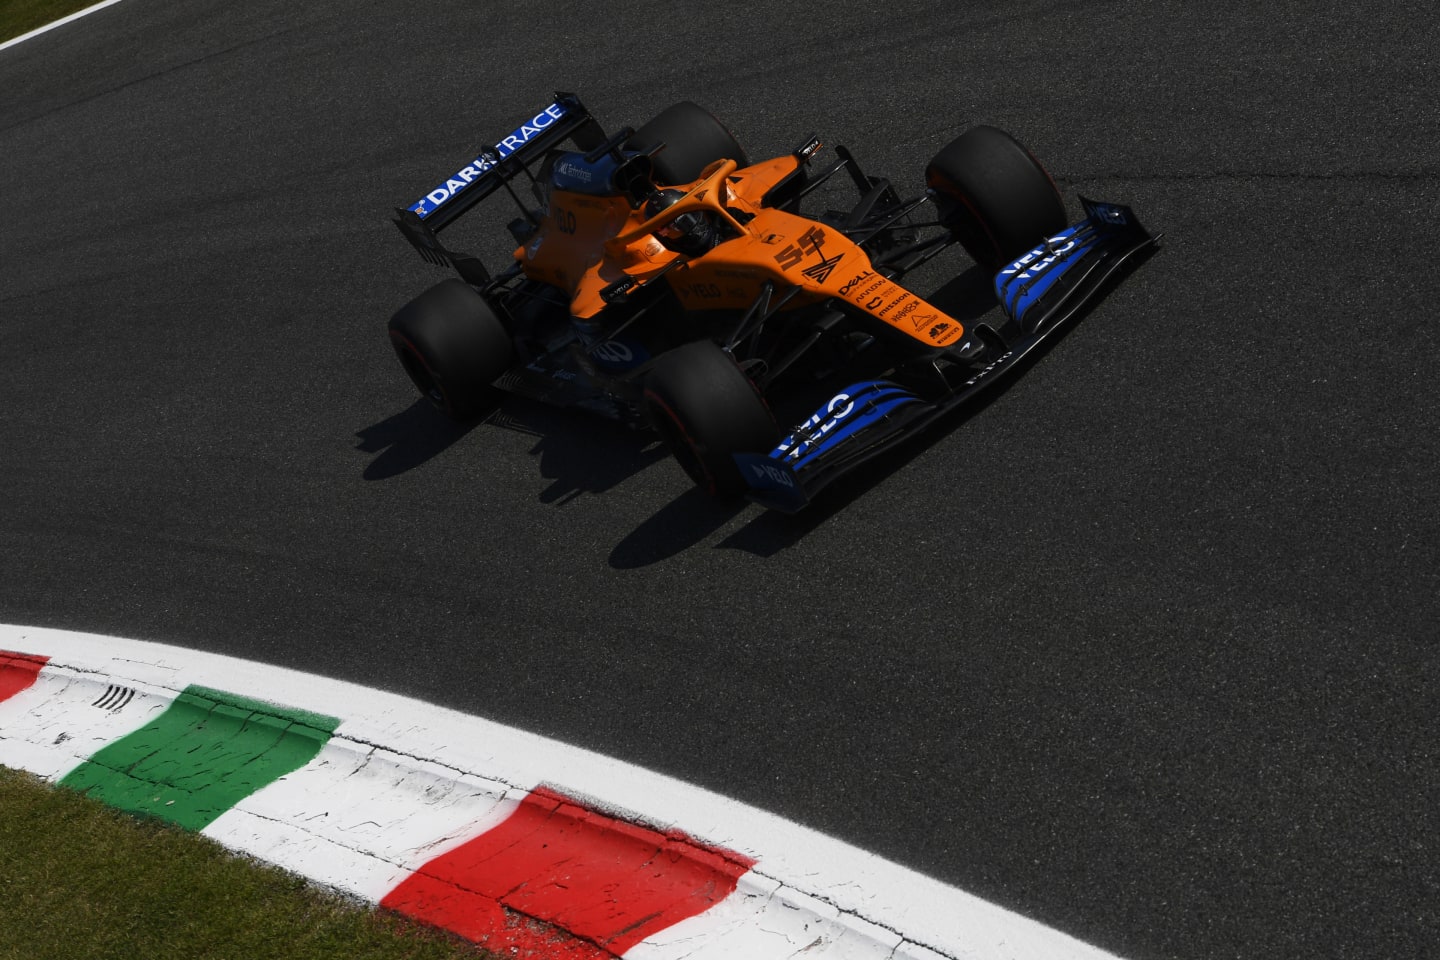 MONZA, ITALY - SEPTEMBER 04: Carlos Sainz of Spain driving the (55) McLaren F1 Team MCL35 Renault on track during practice for the F1 Grand Prix of Italy at Autodromo di Monza on September 04, 2020 in Monza, Italy. (Photo by Rudy Carezzevoli/Getty Images)